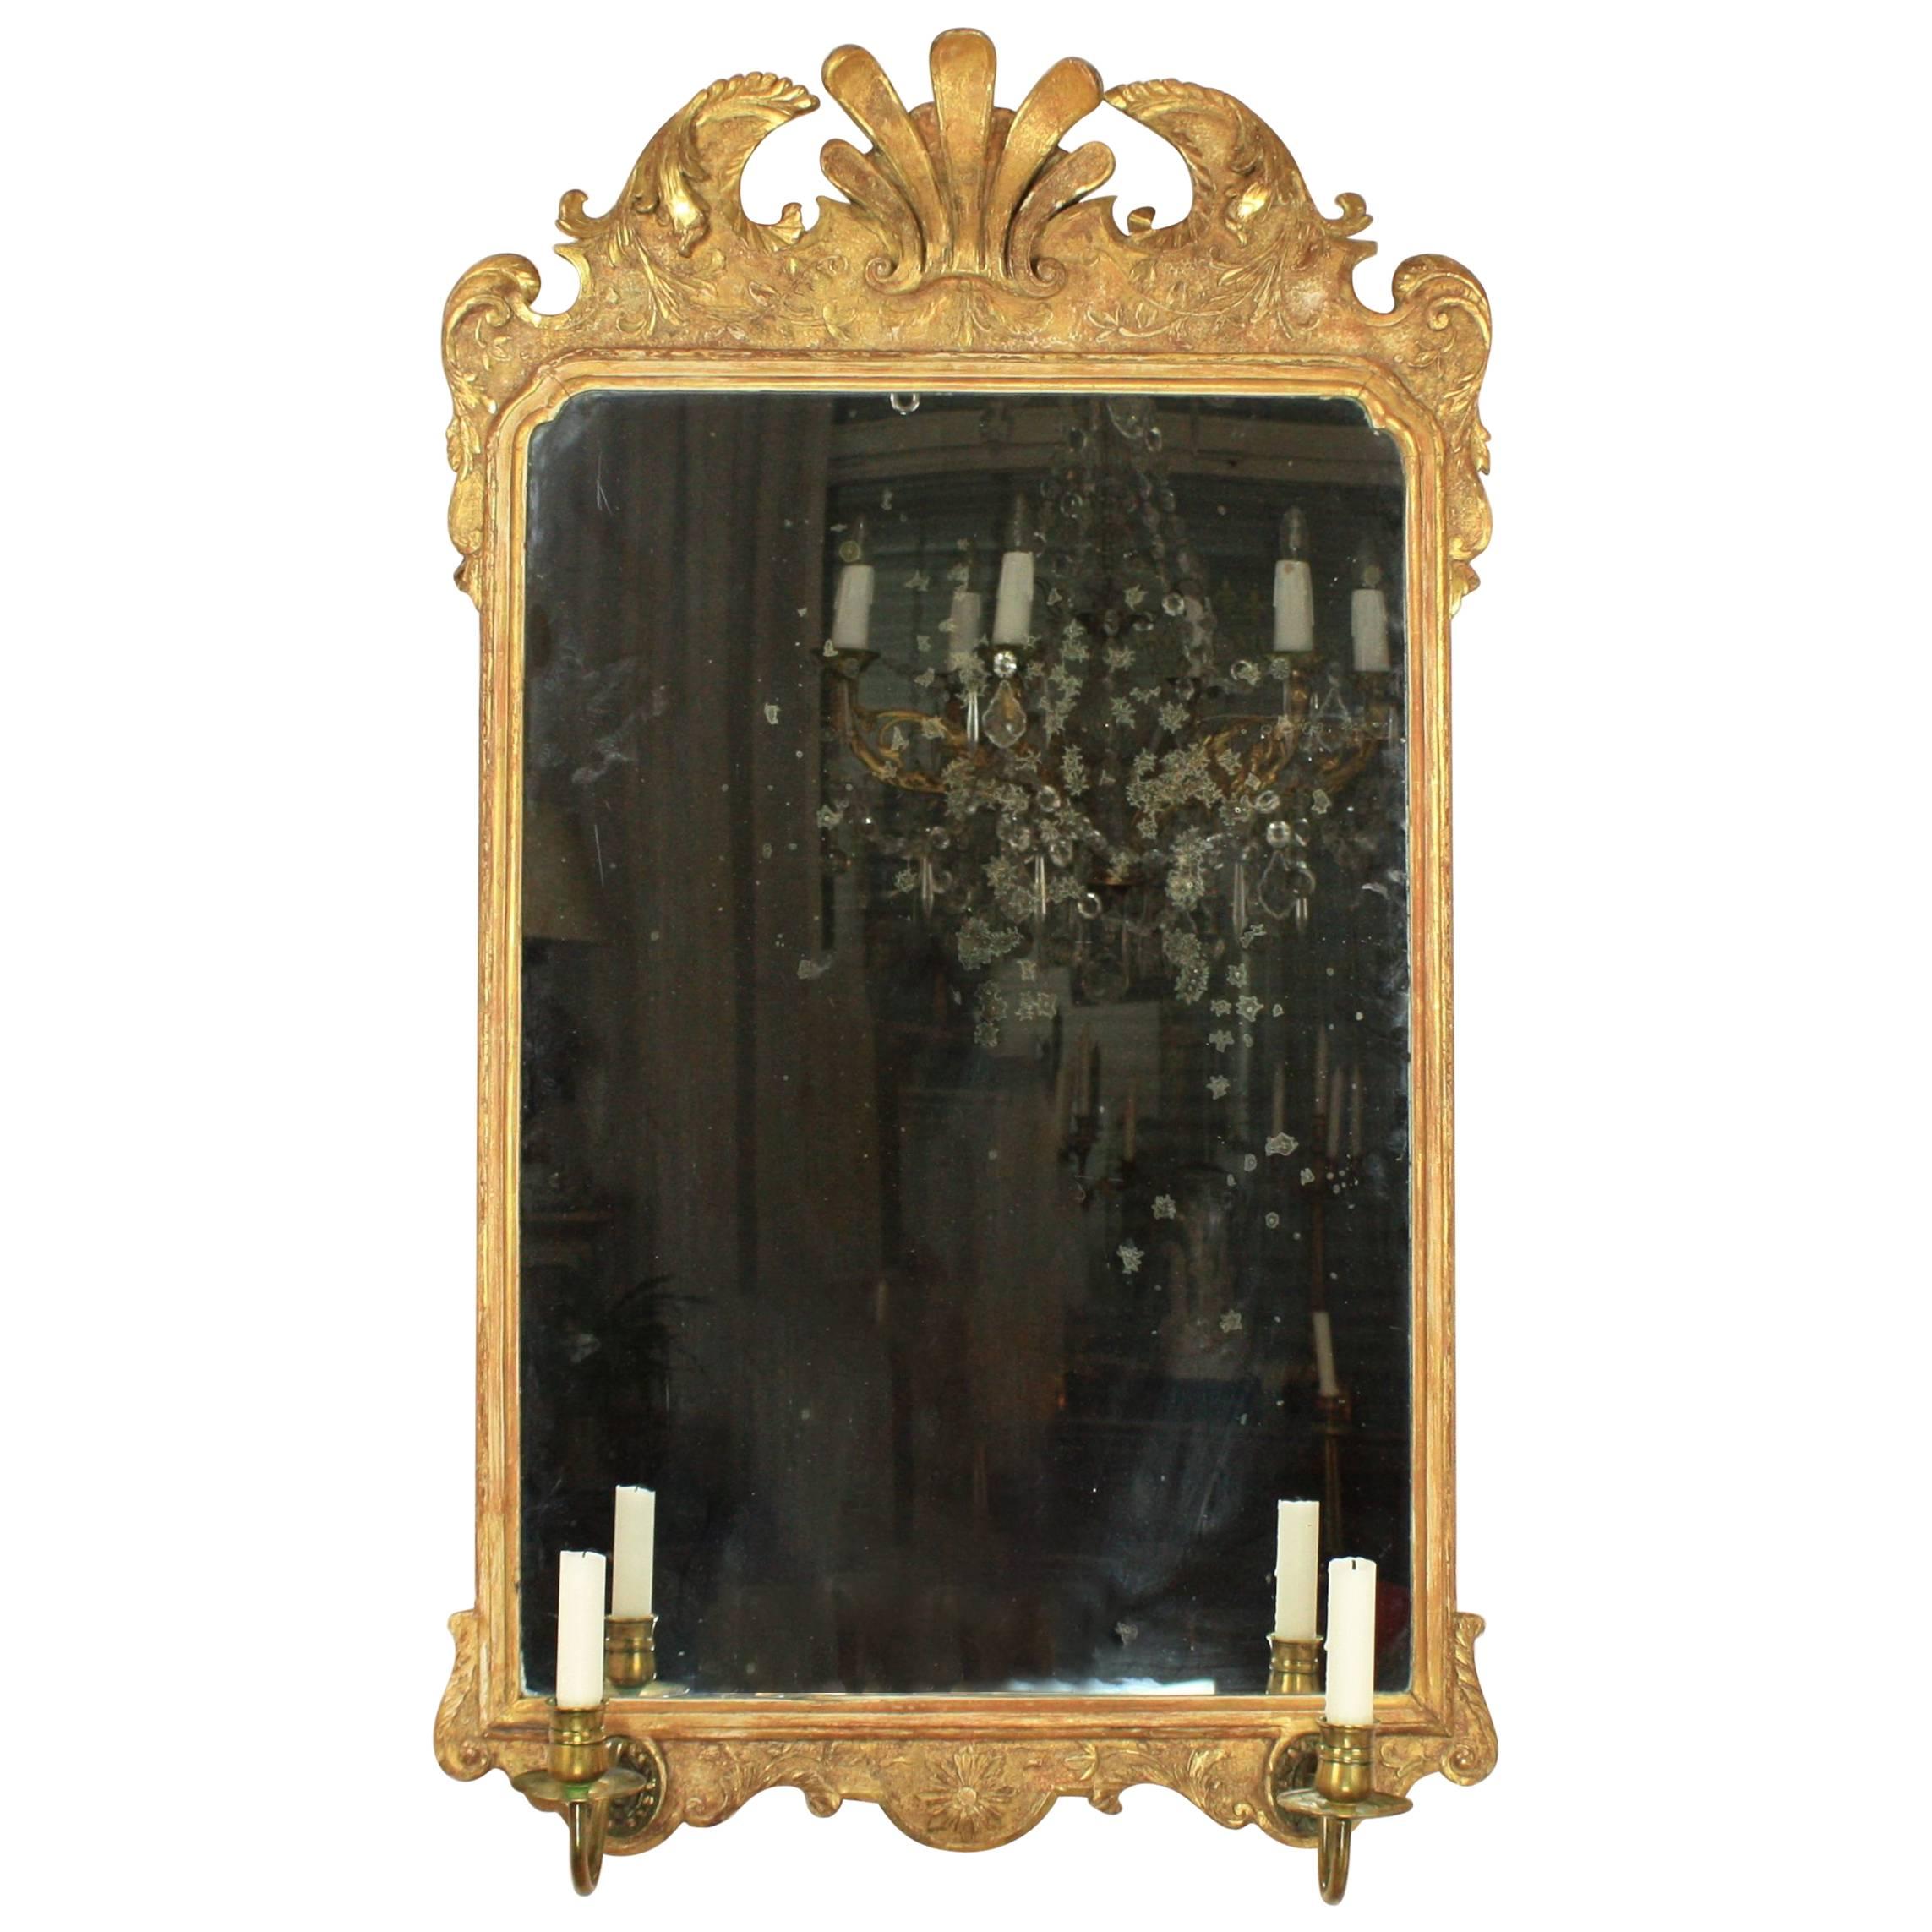 Early 18th Century George I Giltwood Pier Mirror